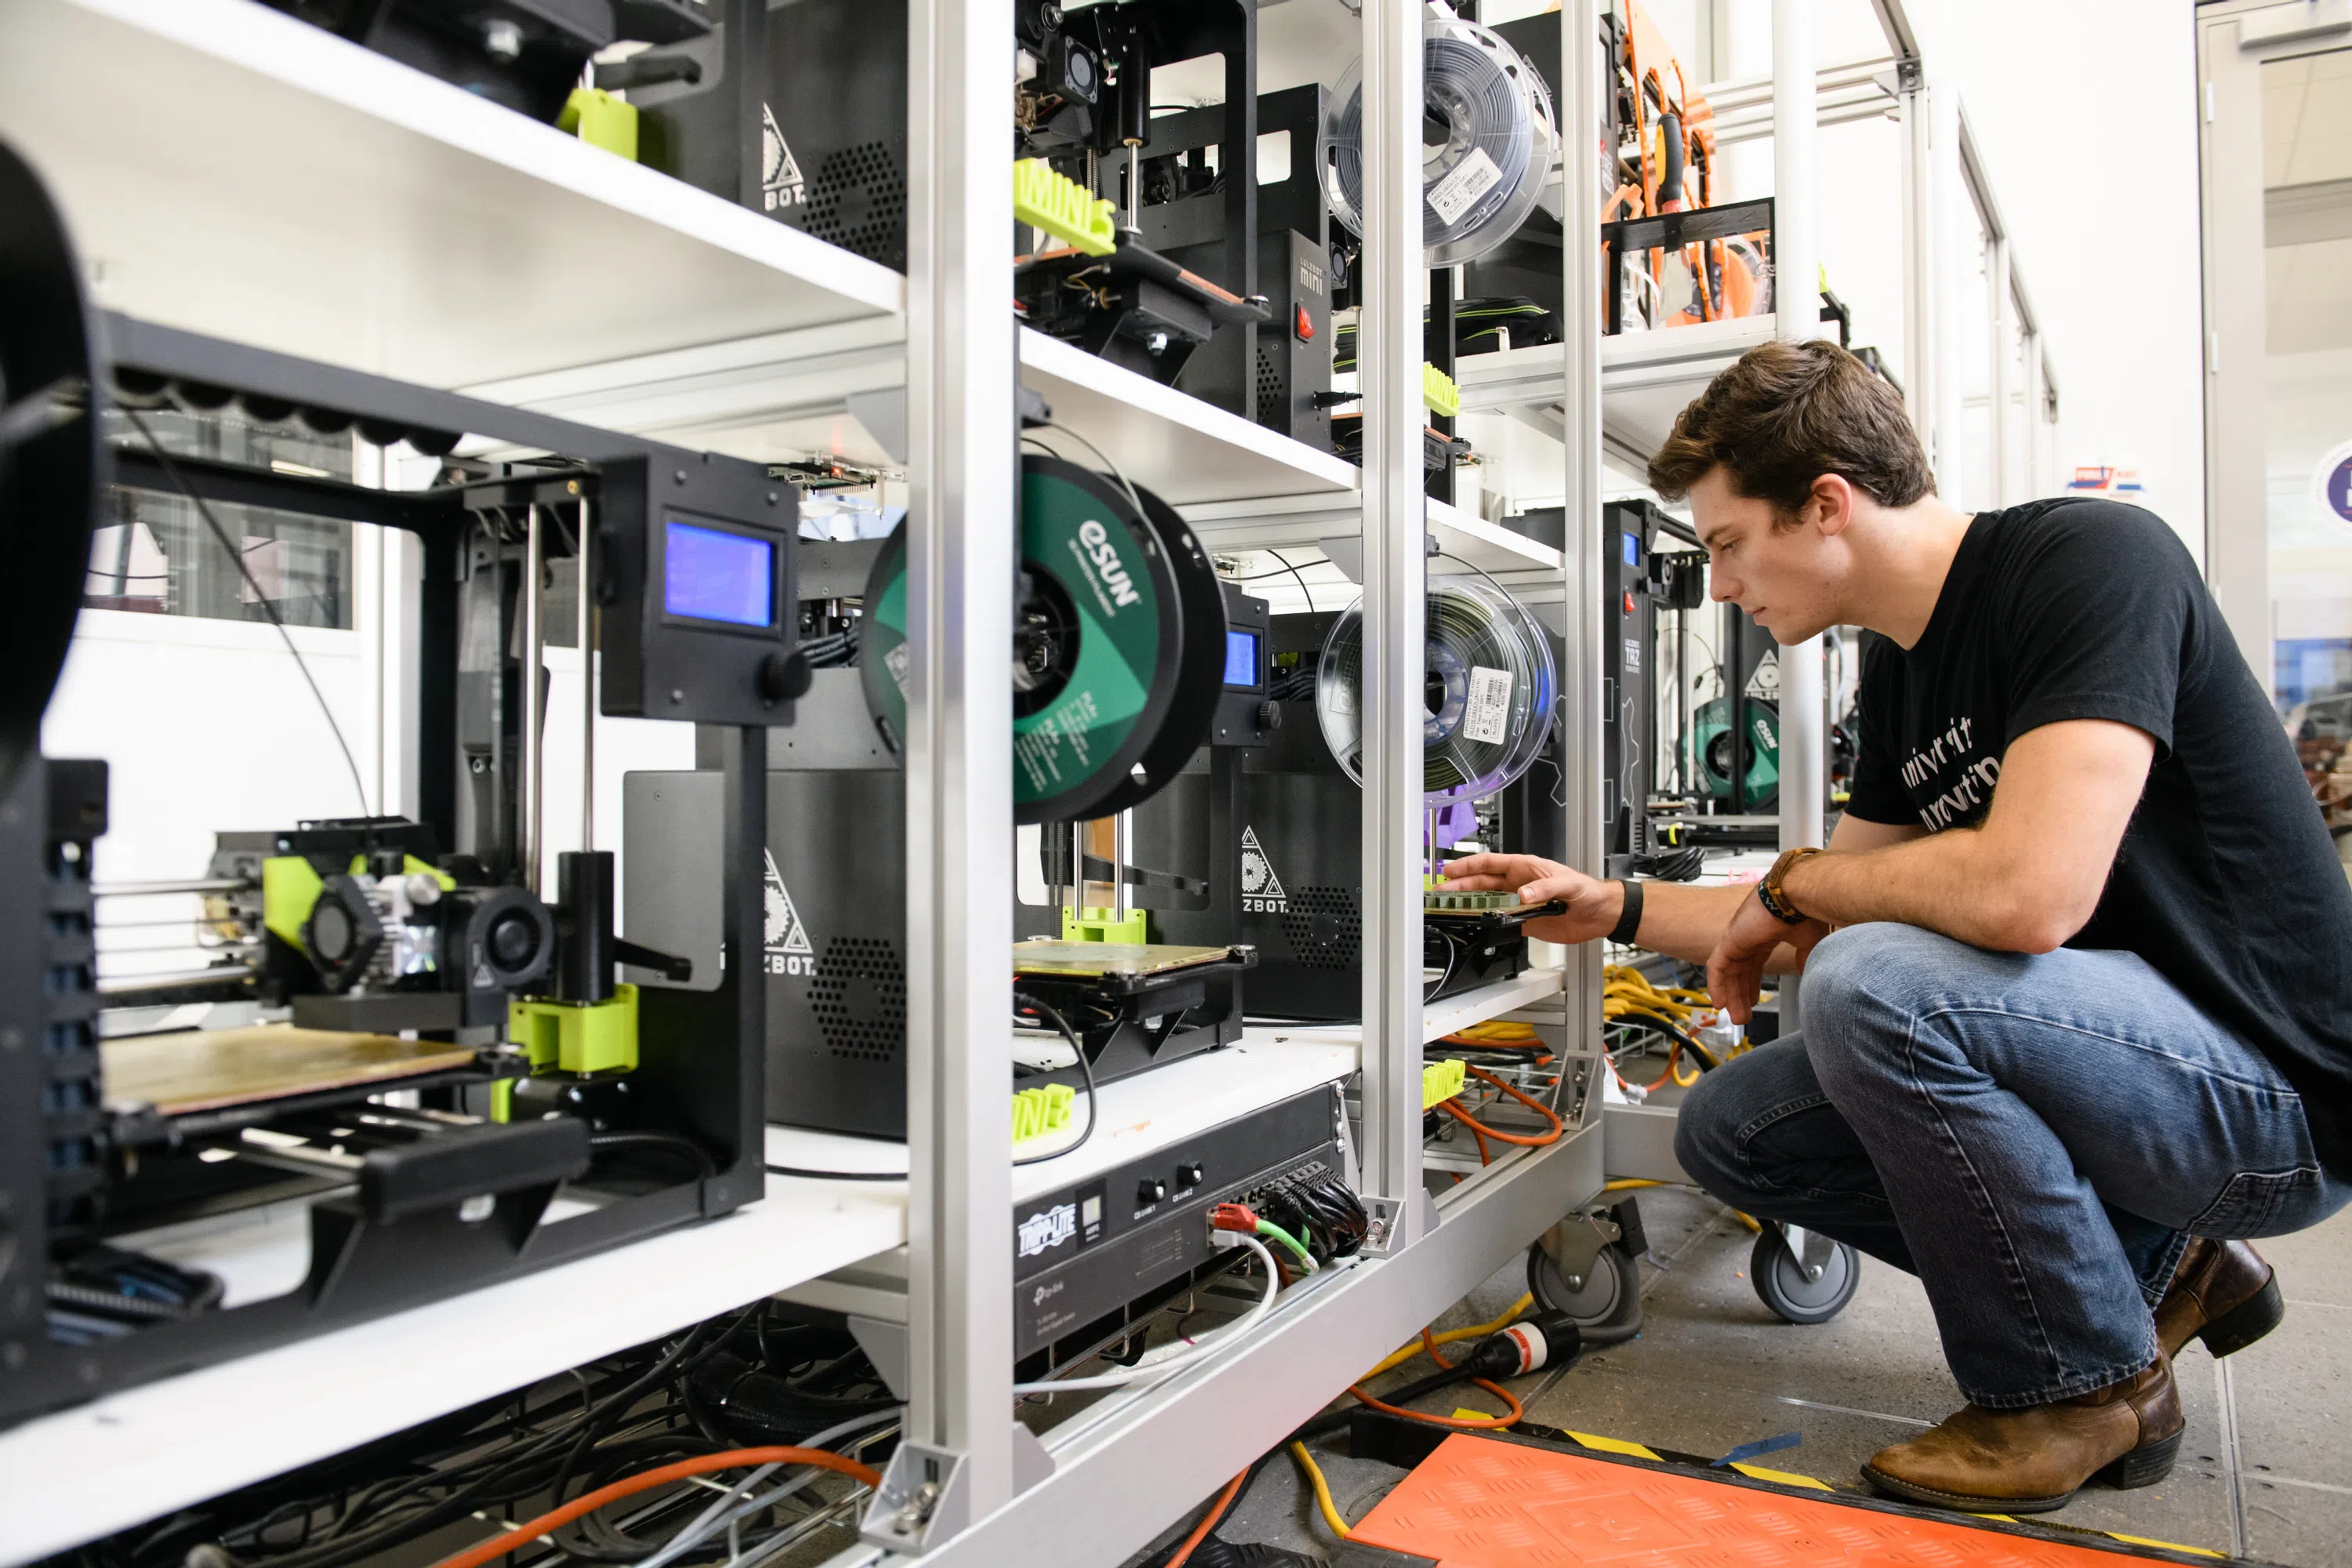 Student Gabriel Herman works with equipment in the Makerspace in the Watt Center.